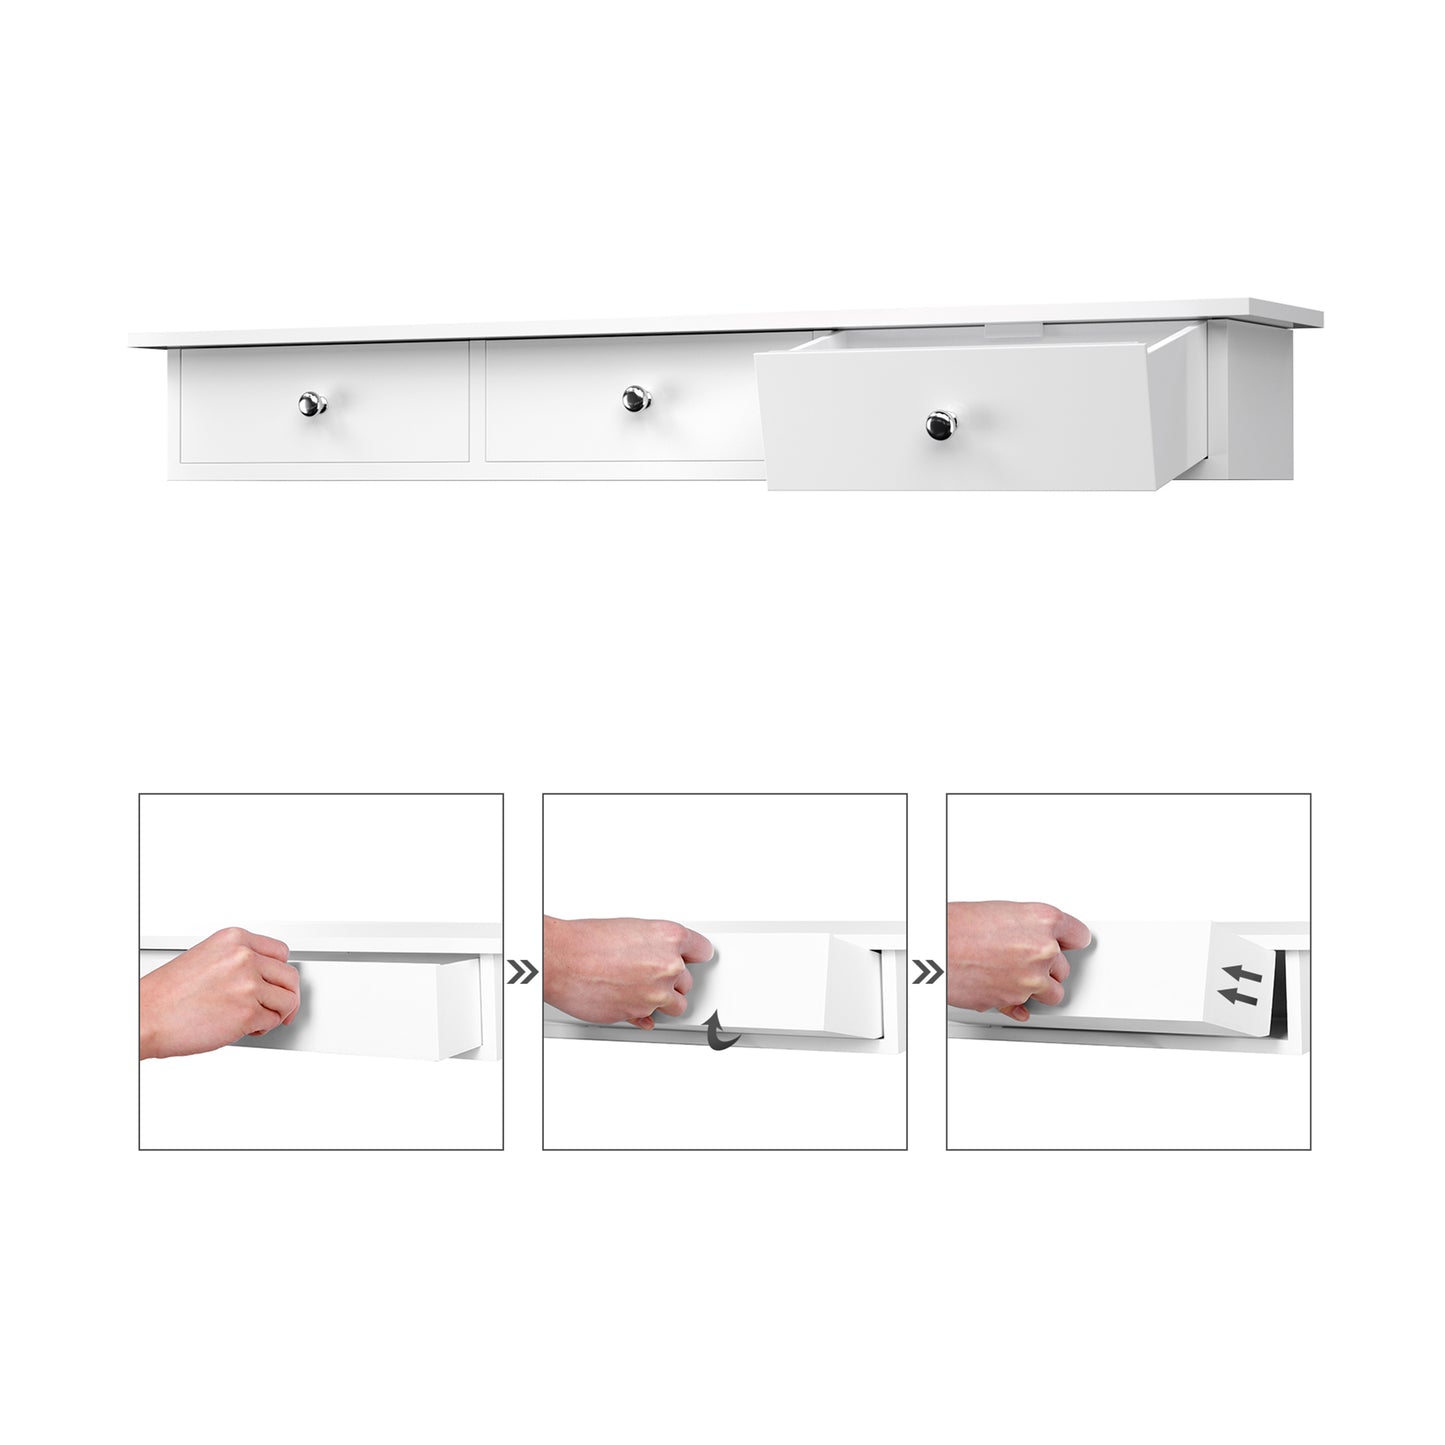 Wall shelf with drawers white